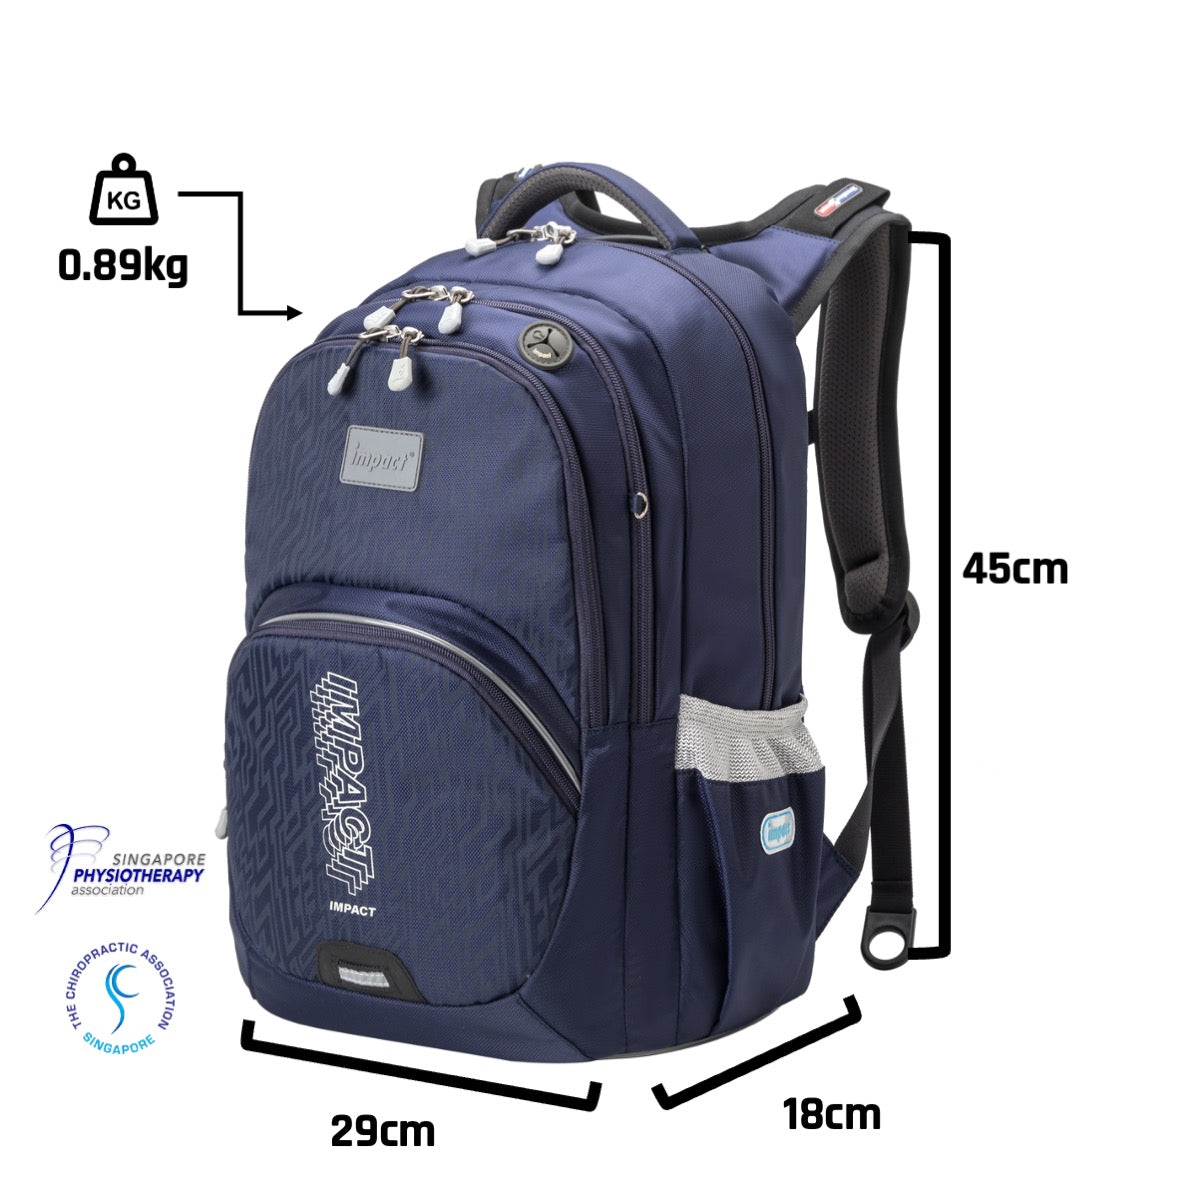 IMPACT - IM-00385 - IMPACT ERGO-COMFORT SPINAL SUPPORT BACKPACK